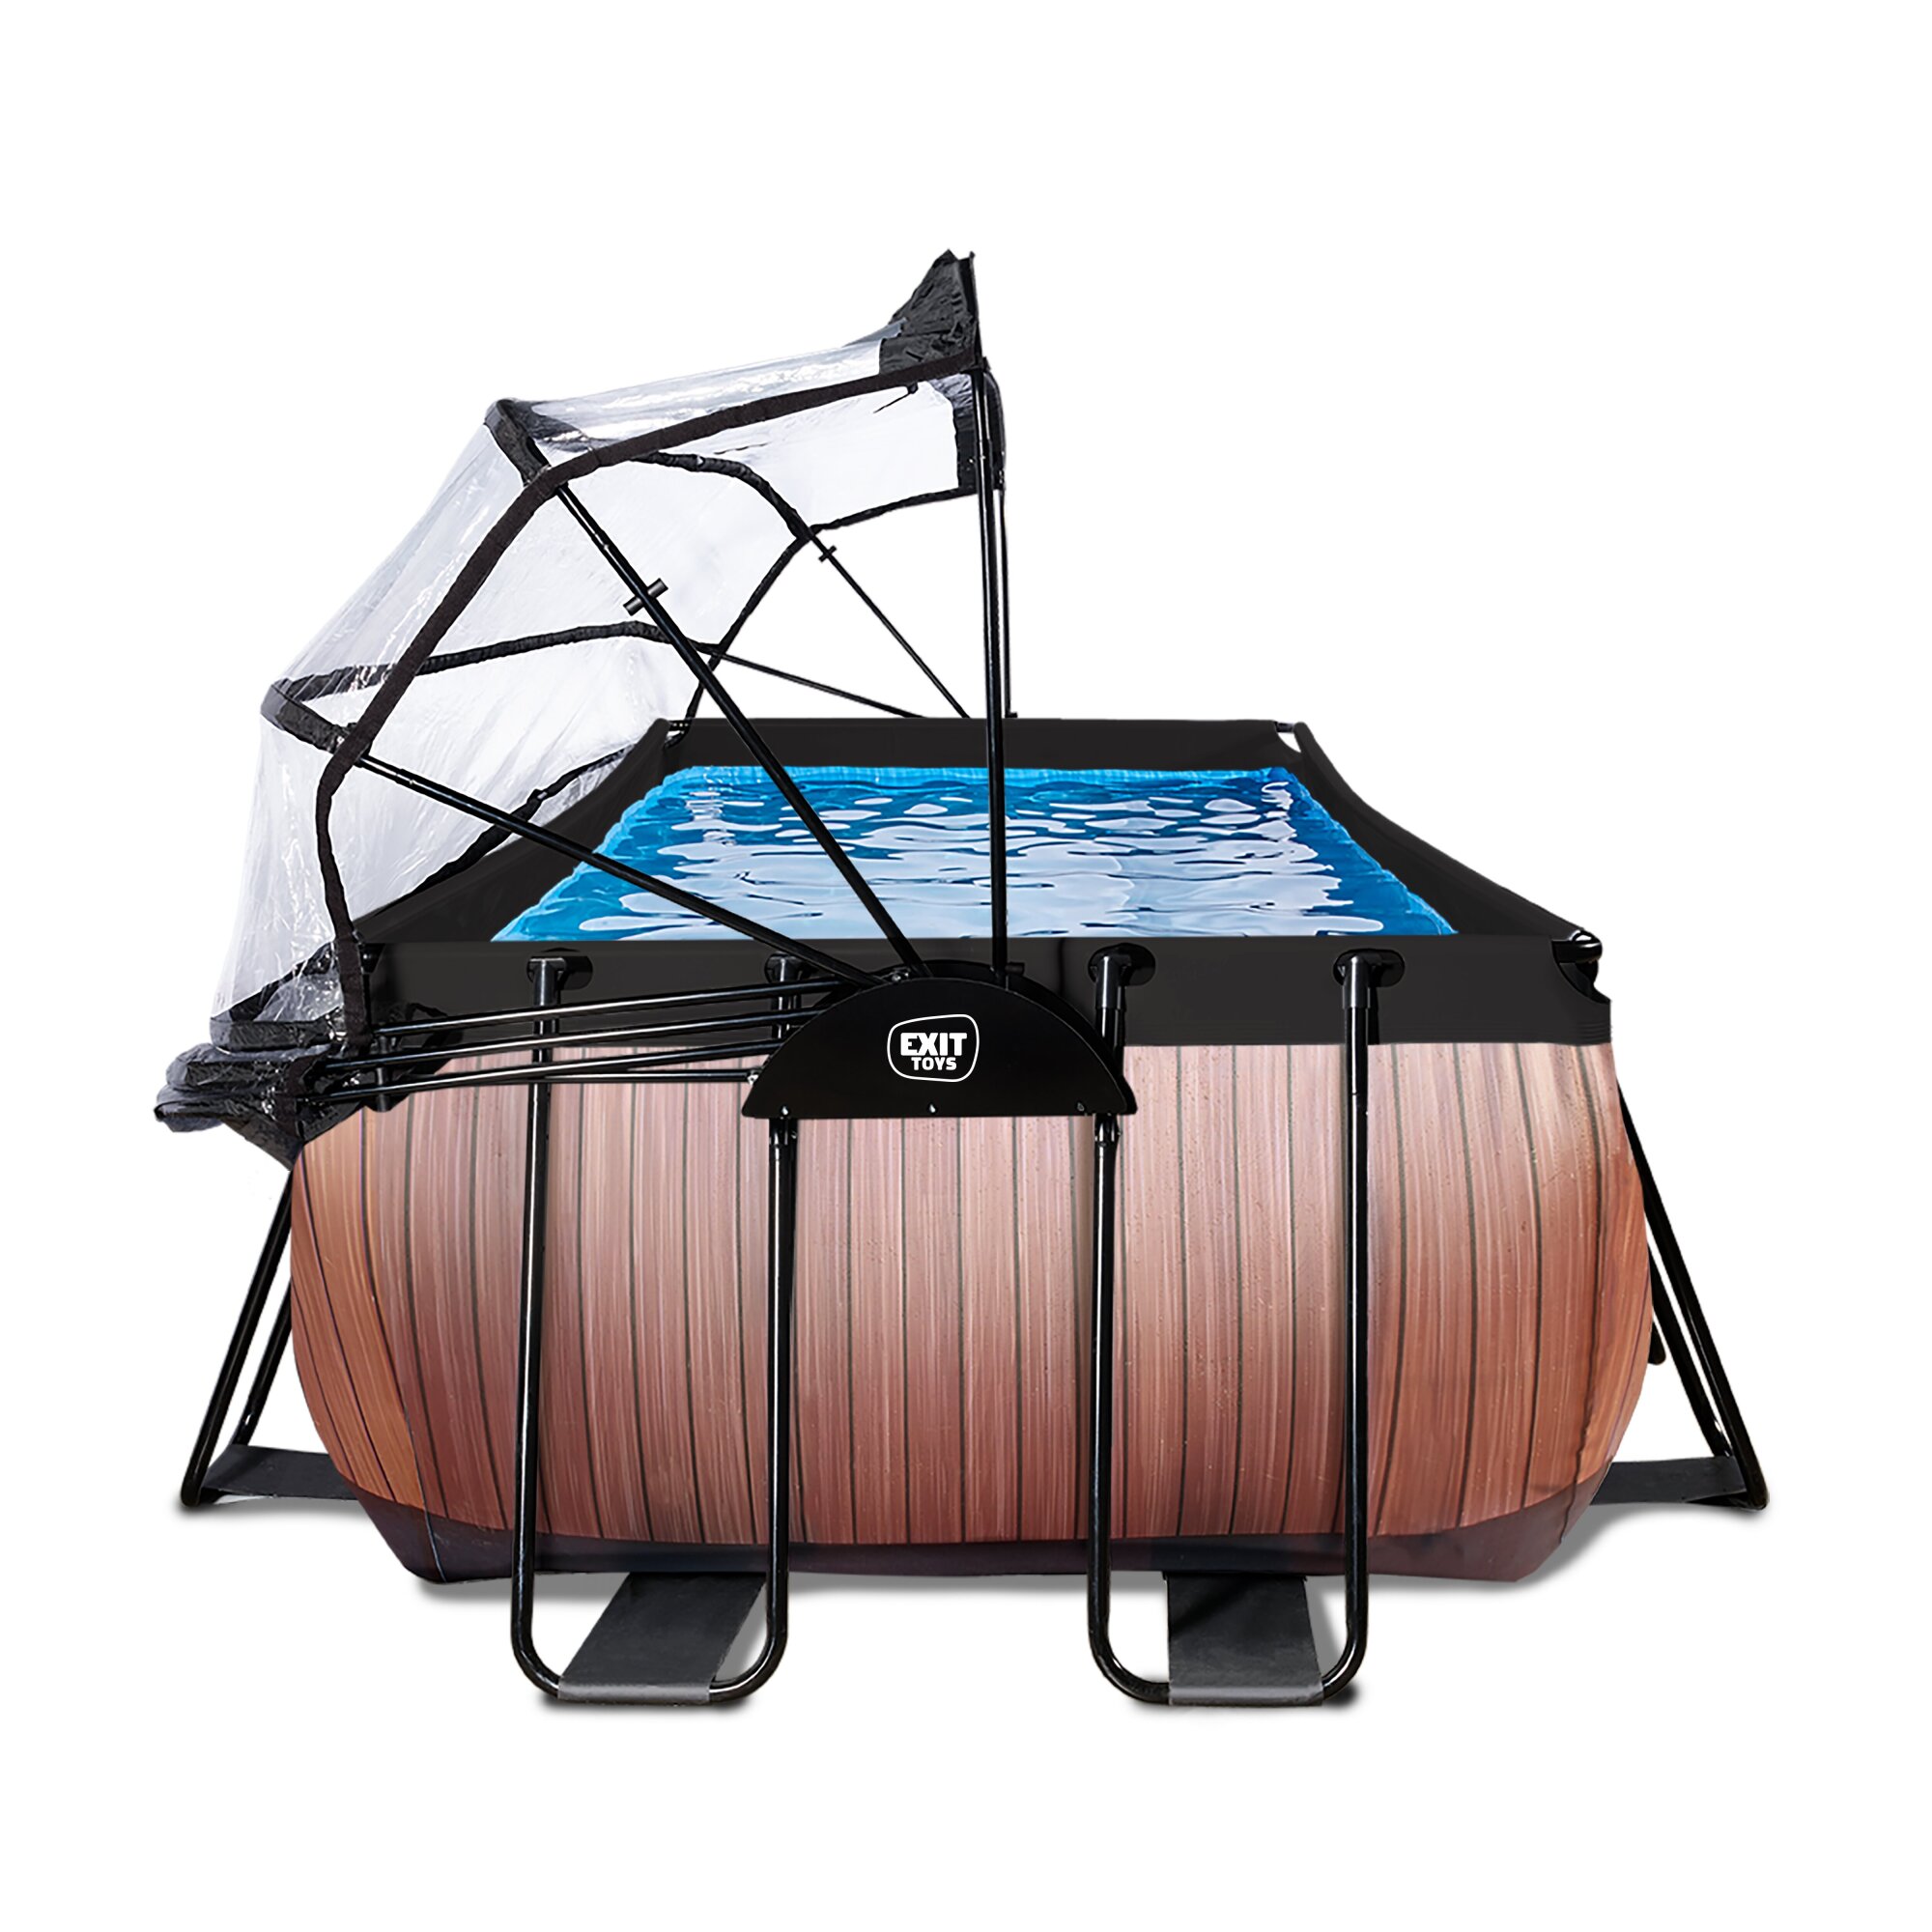 EXIT Wood pool 540x250x122cm with sand filter pump and dome and heat pump - brown